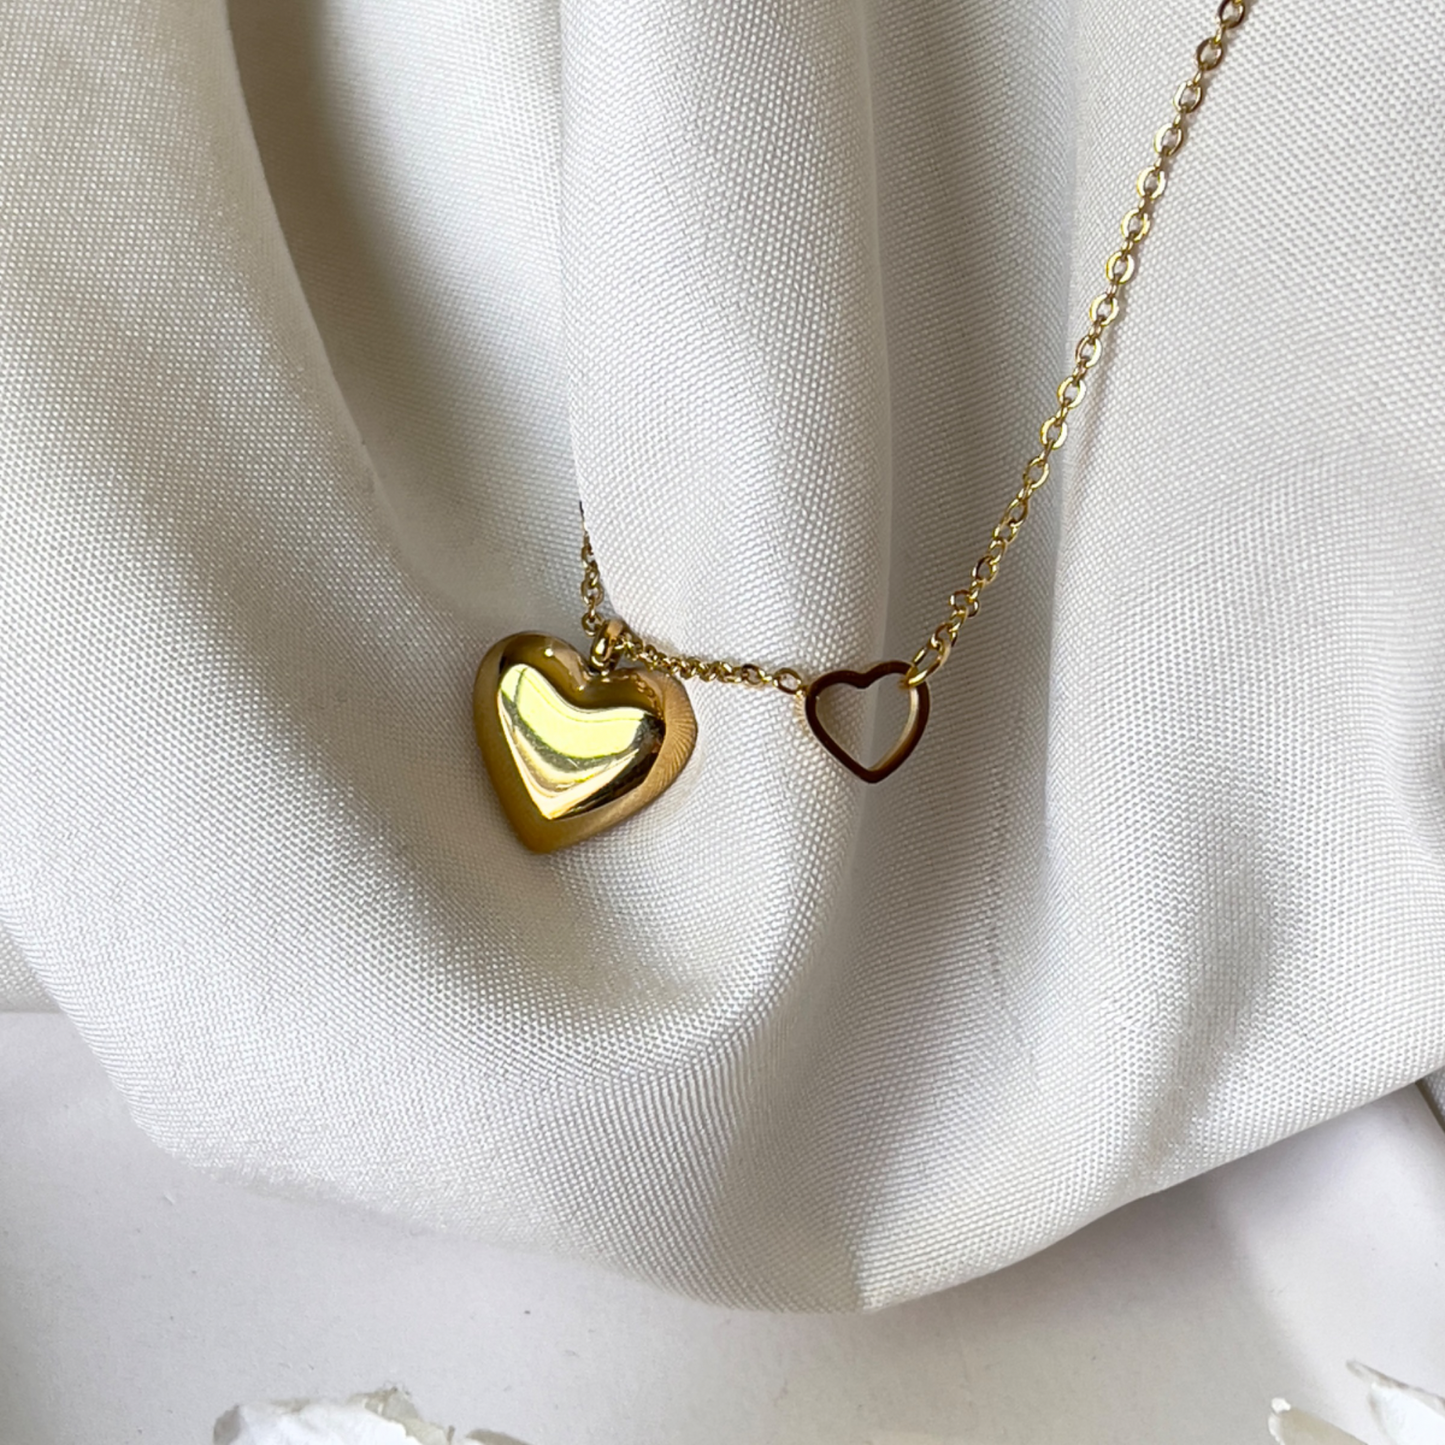 The 2in1 Golden Heart Necklace